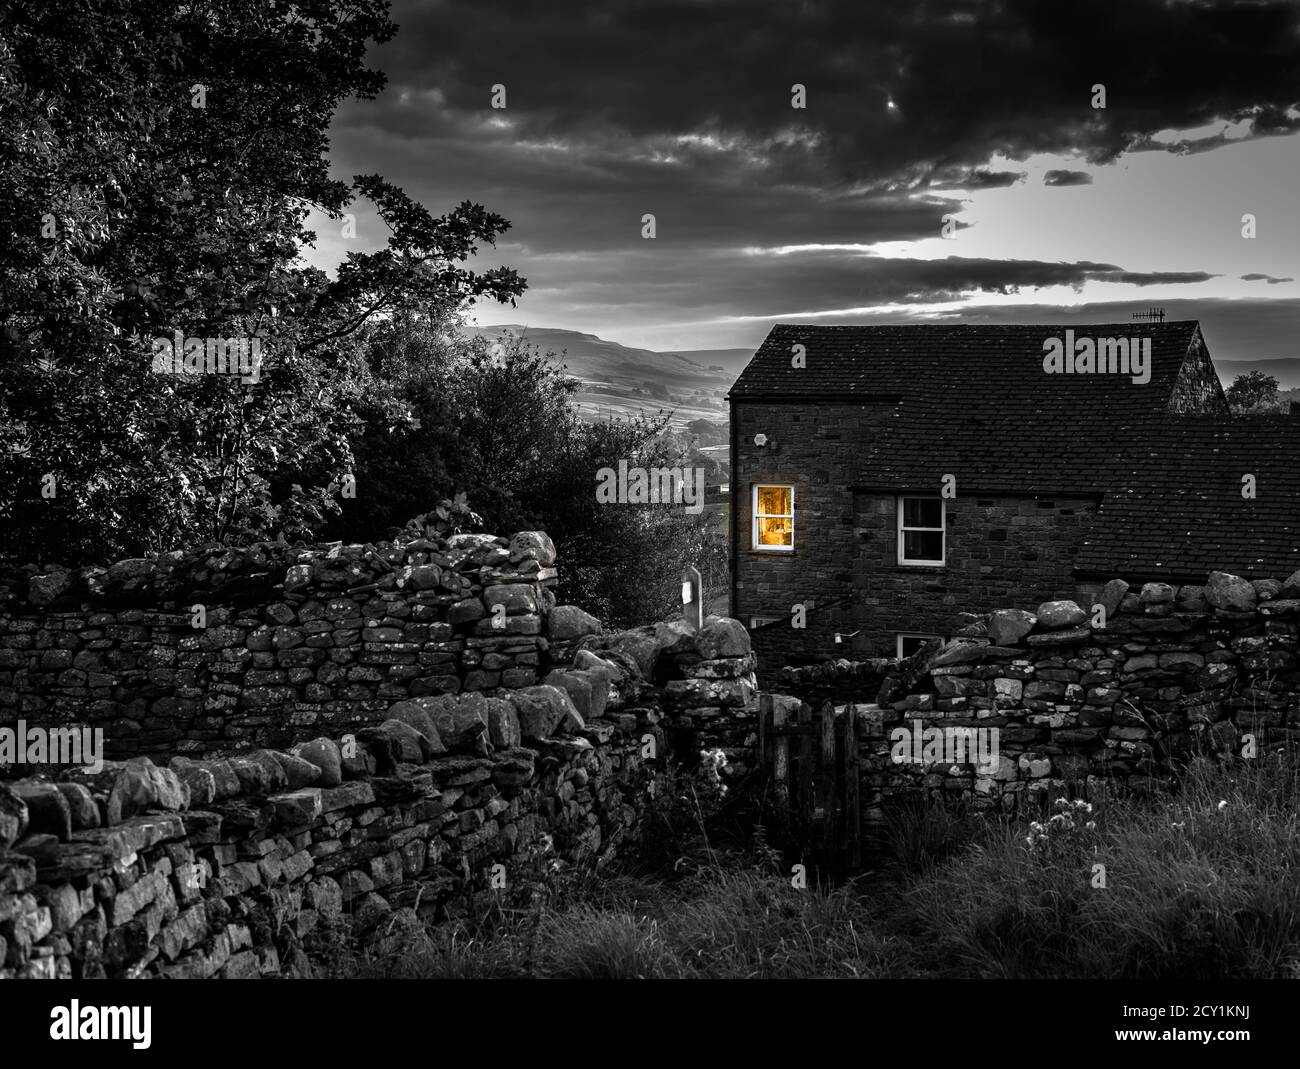 Black and white image of a stone cottage at dusk with warm orange glow from a window in the Yorkshire Dales, England, Uk. Stock Photo